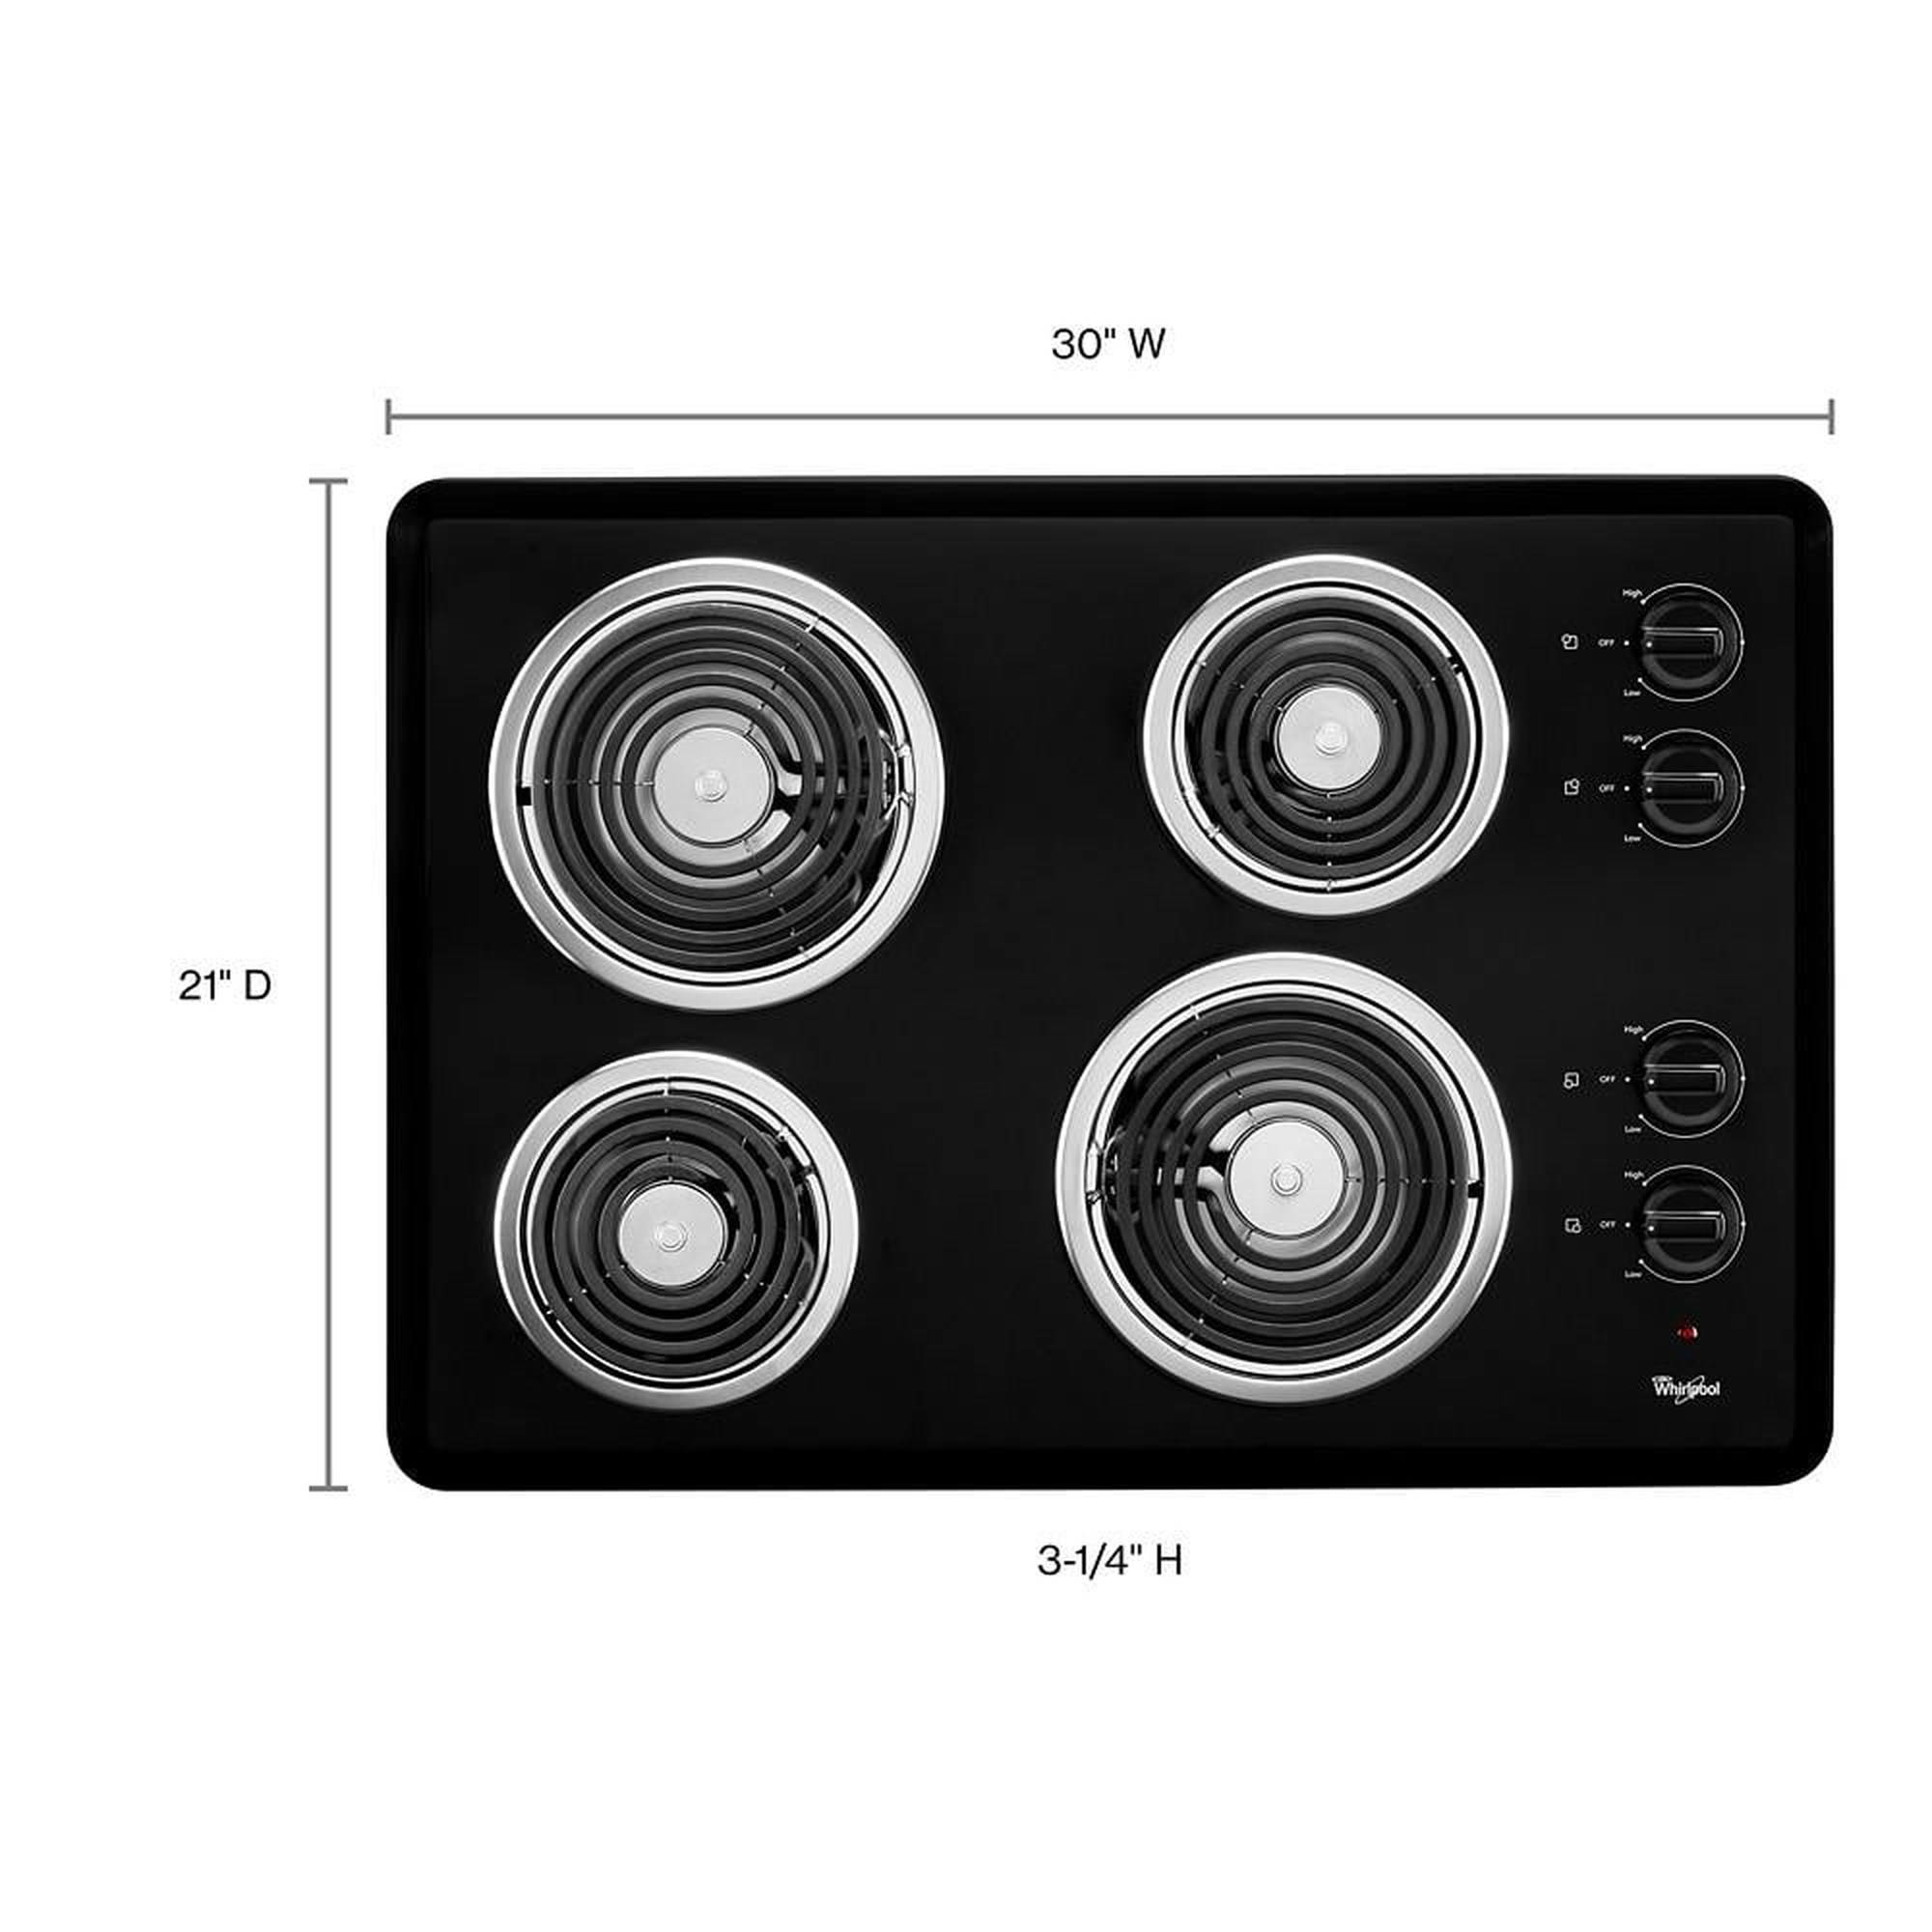 Whirlpool WCE55US0HB 30 Electric Cooktop - Black